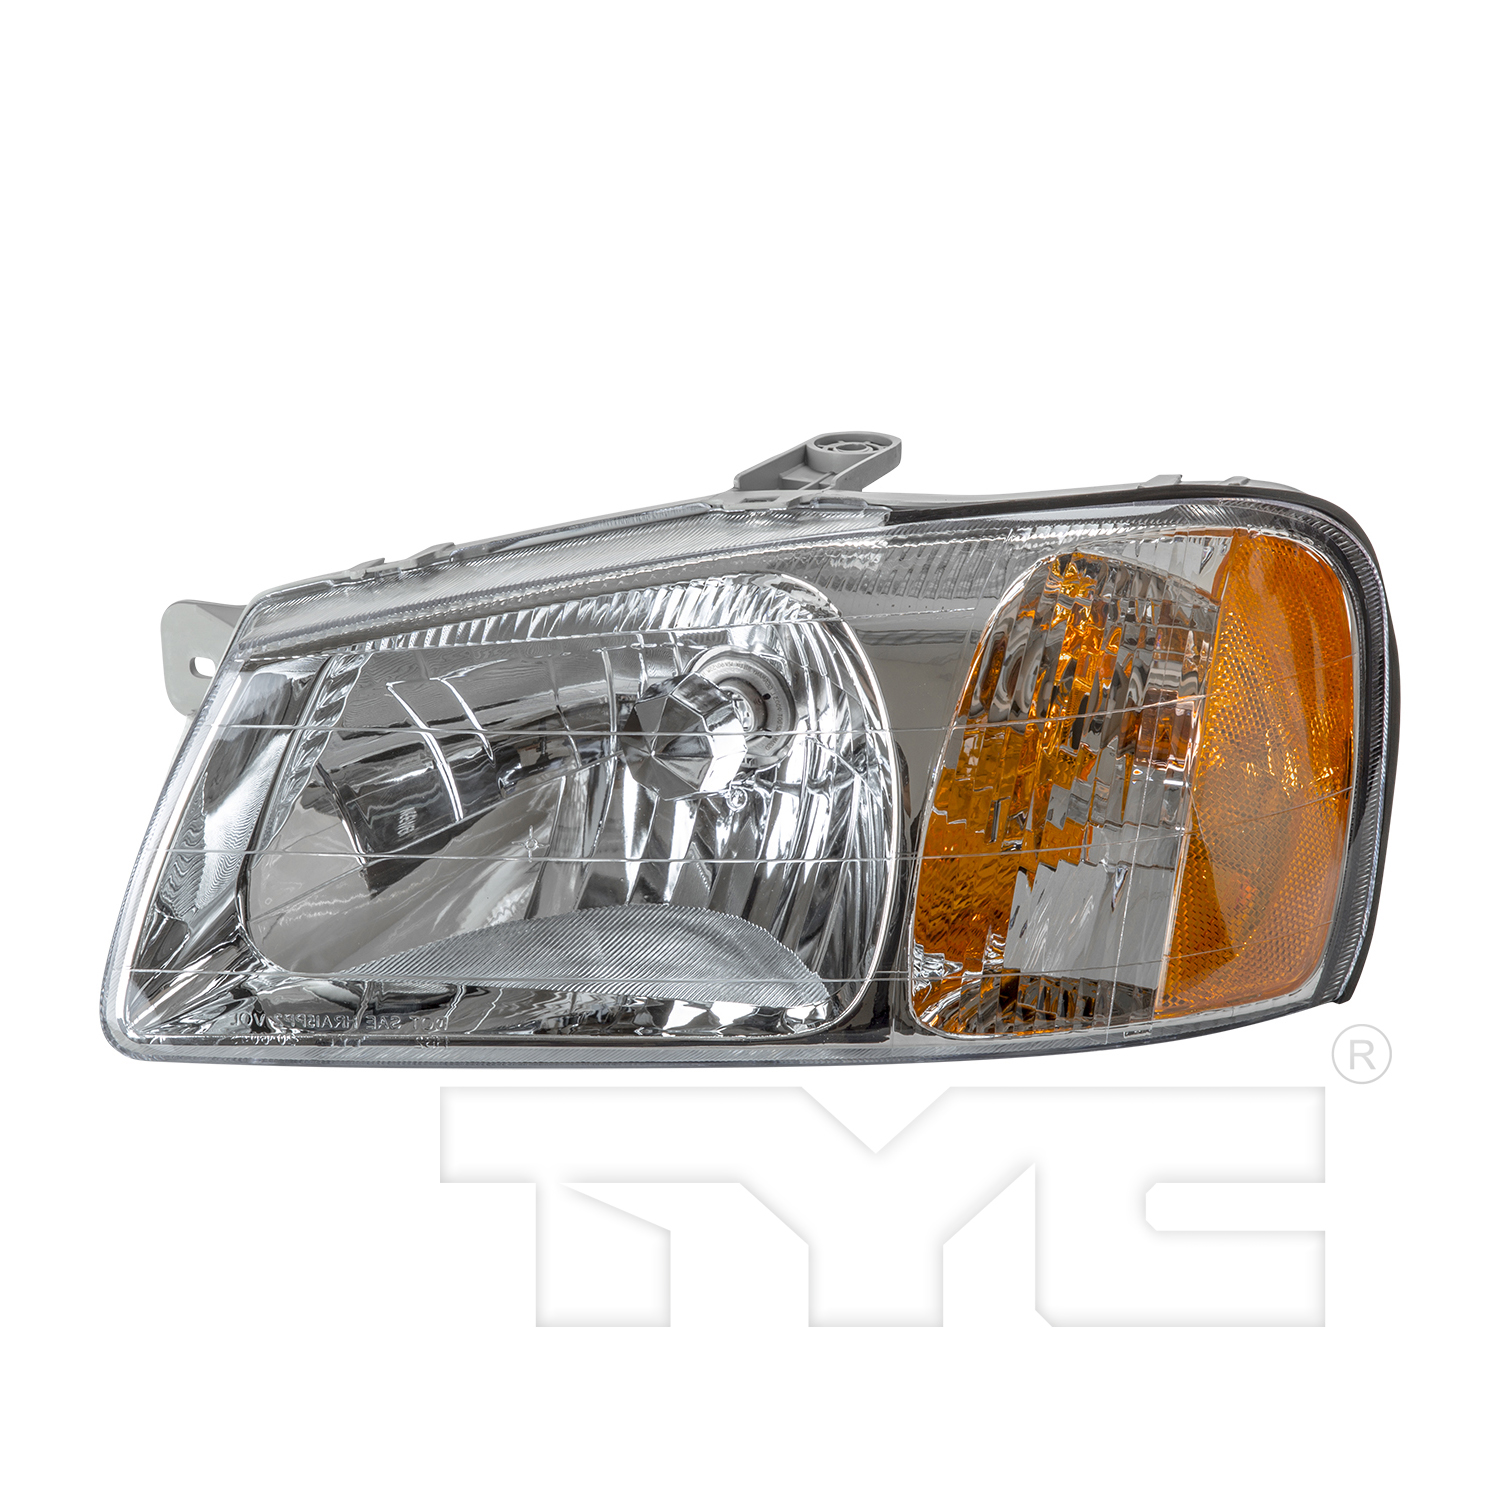 Aftermarket HEADLIGHTS for HYUNDAI - ACCENT, ACCENT,00-02,LT Headlamp assy composite